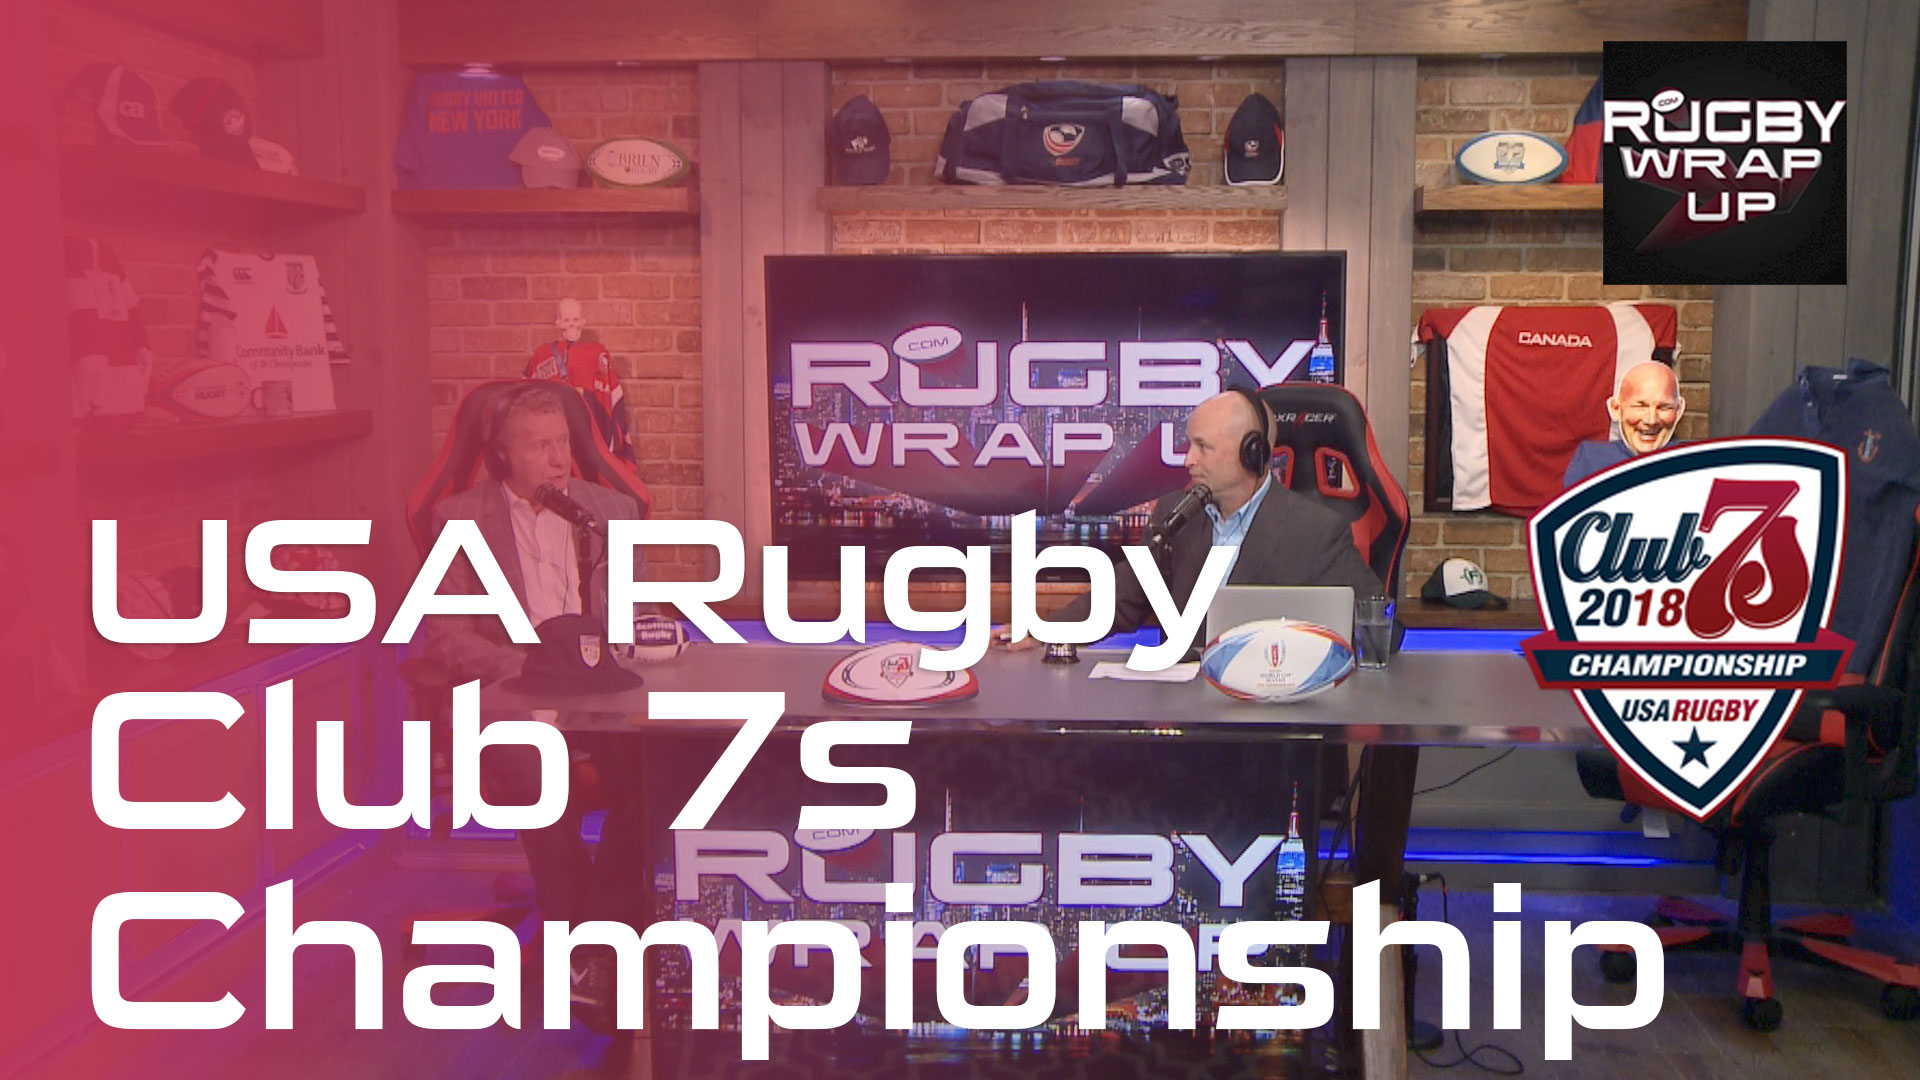 USA_Rugby, National Club 7s Preview, RWC 7s Final Thoughts. Lewis & McCarthy | RUGBY WRAP UP